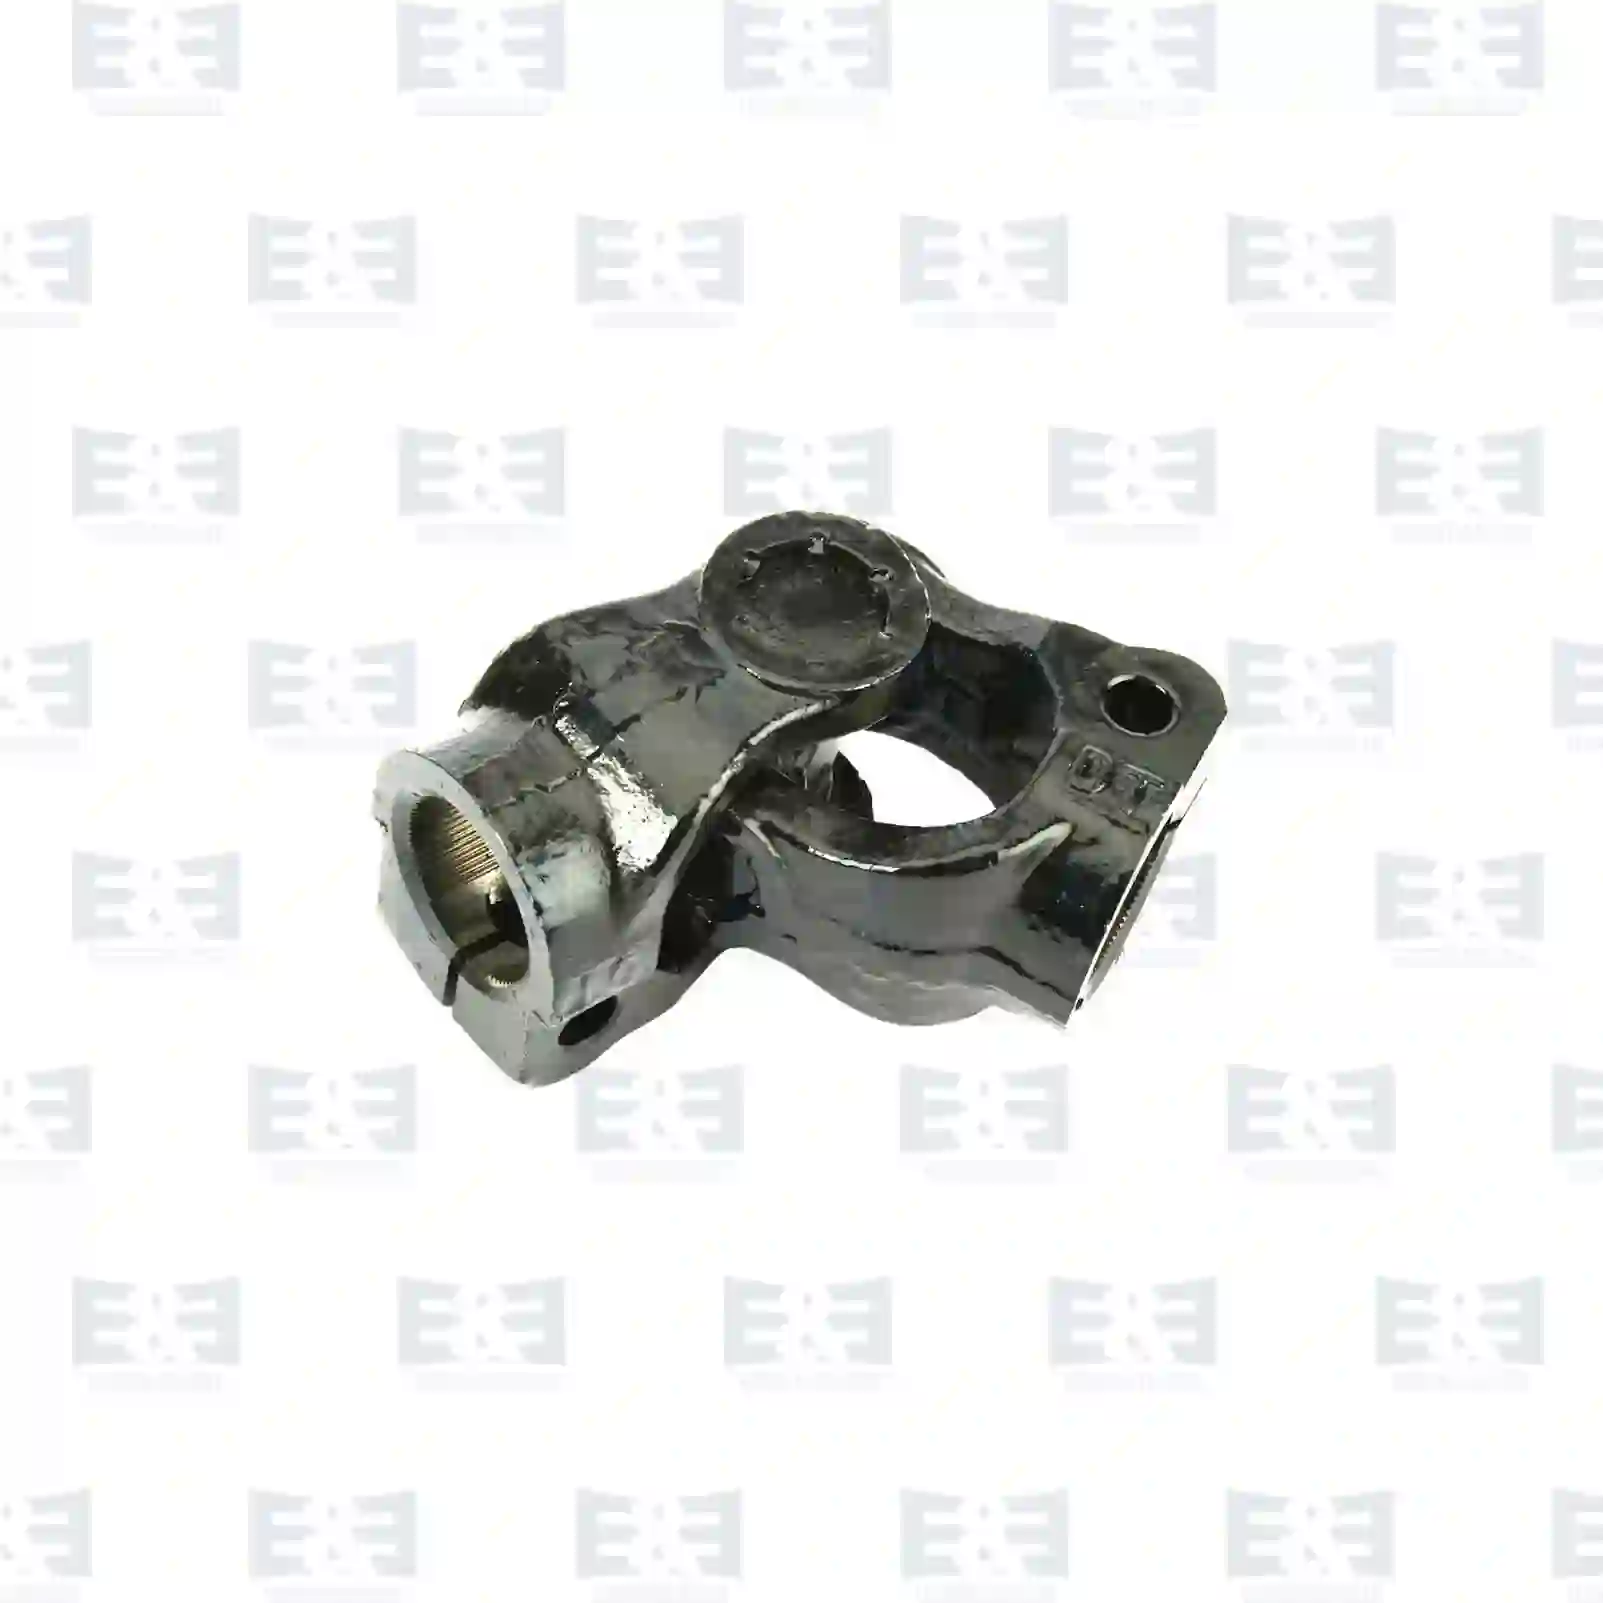 Steering Column Universal joint, EE No 2E2205944 ,  oem no:0393890, 393890, 4214600457, 4254600057, 4254600157, 4254600457, 5001834314, 1606501, 1606502, 8189503, ZG40690-0008 E&E Truck Spare Parts | Truck Spare Parts, Auotomotive Spare Parts